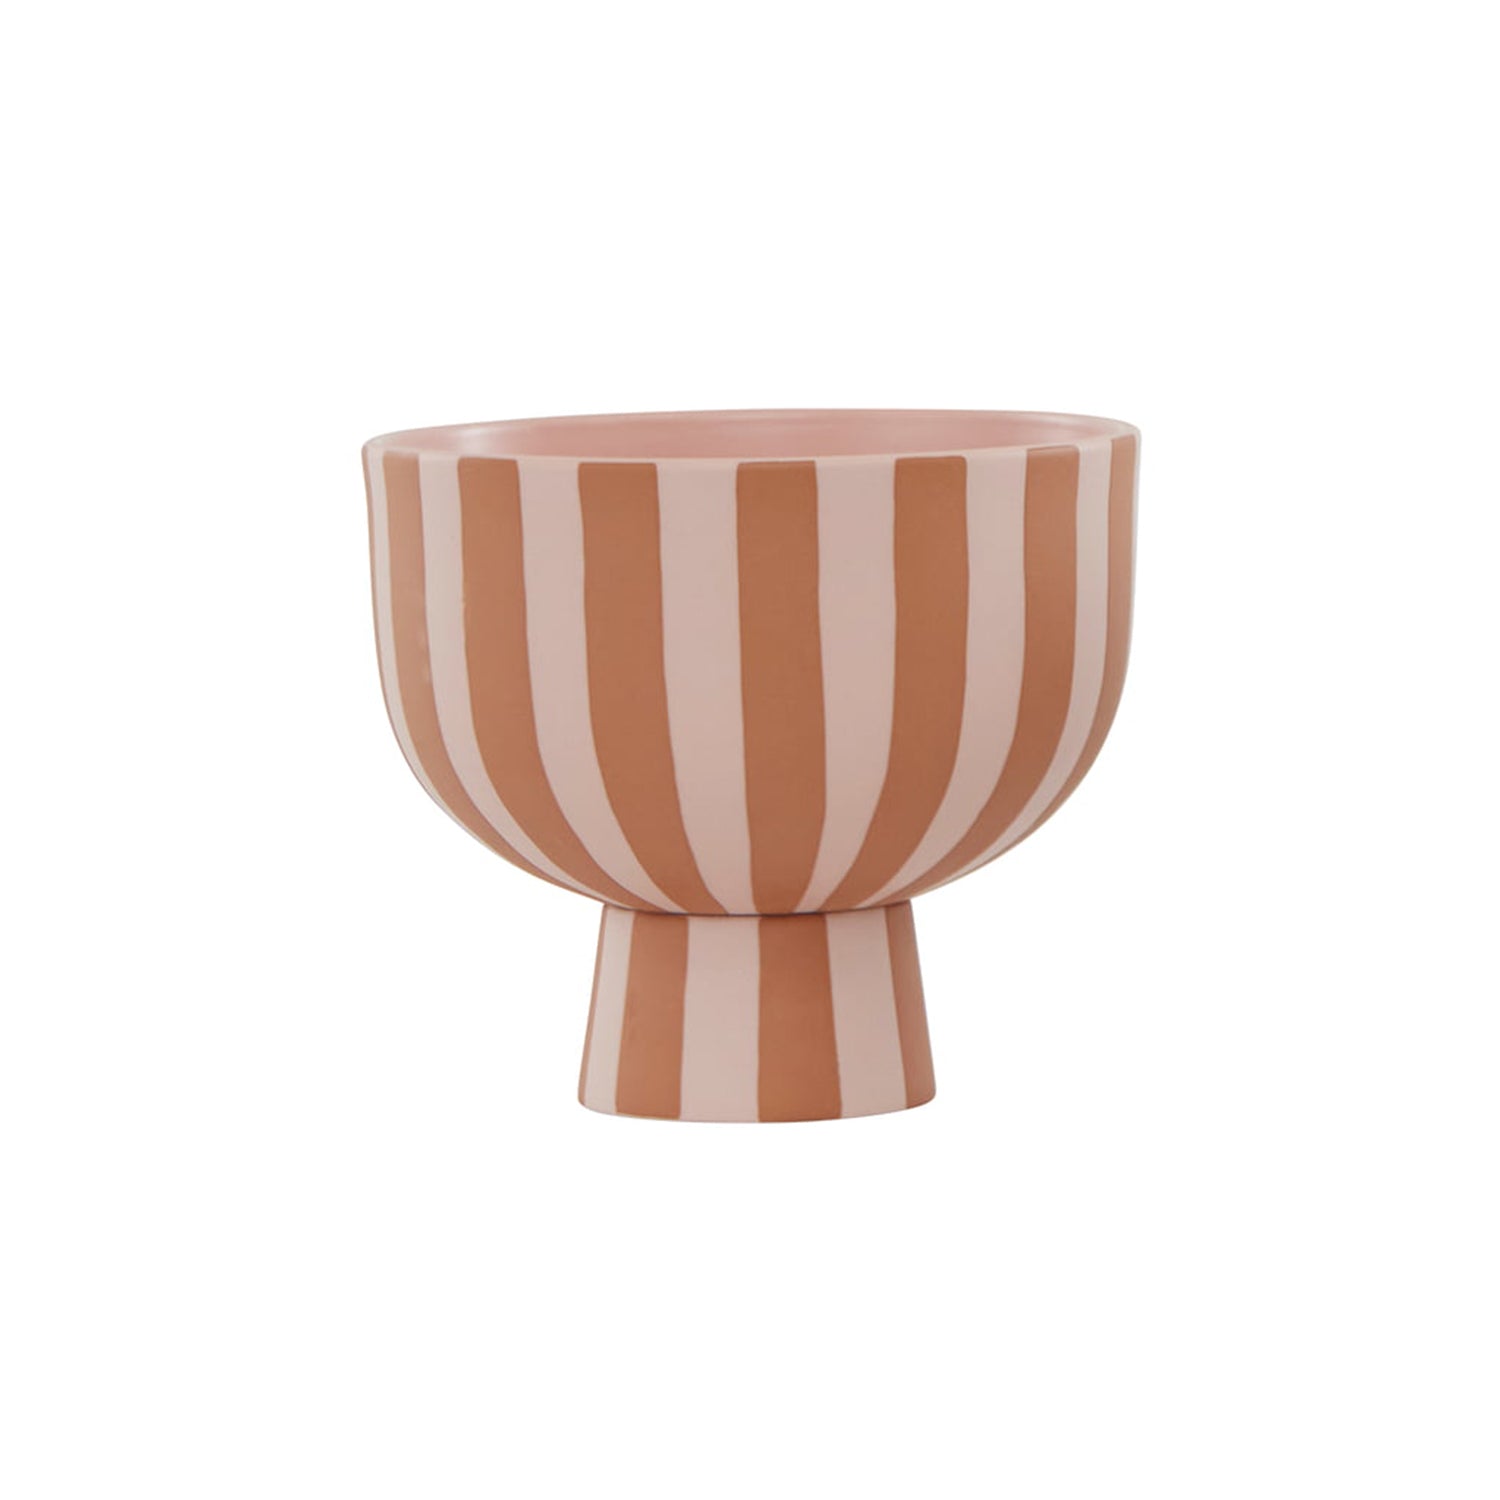 Toppu Bowl (Available in 3 colors)